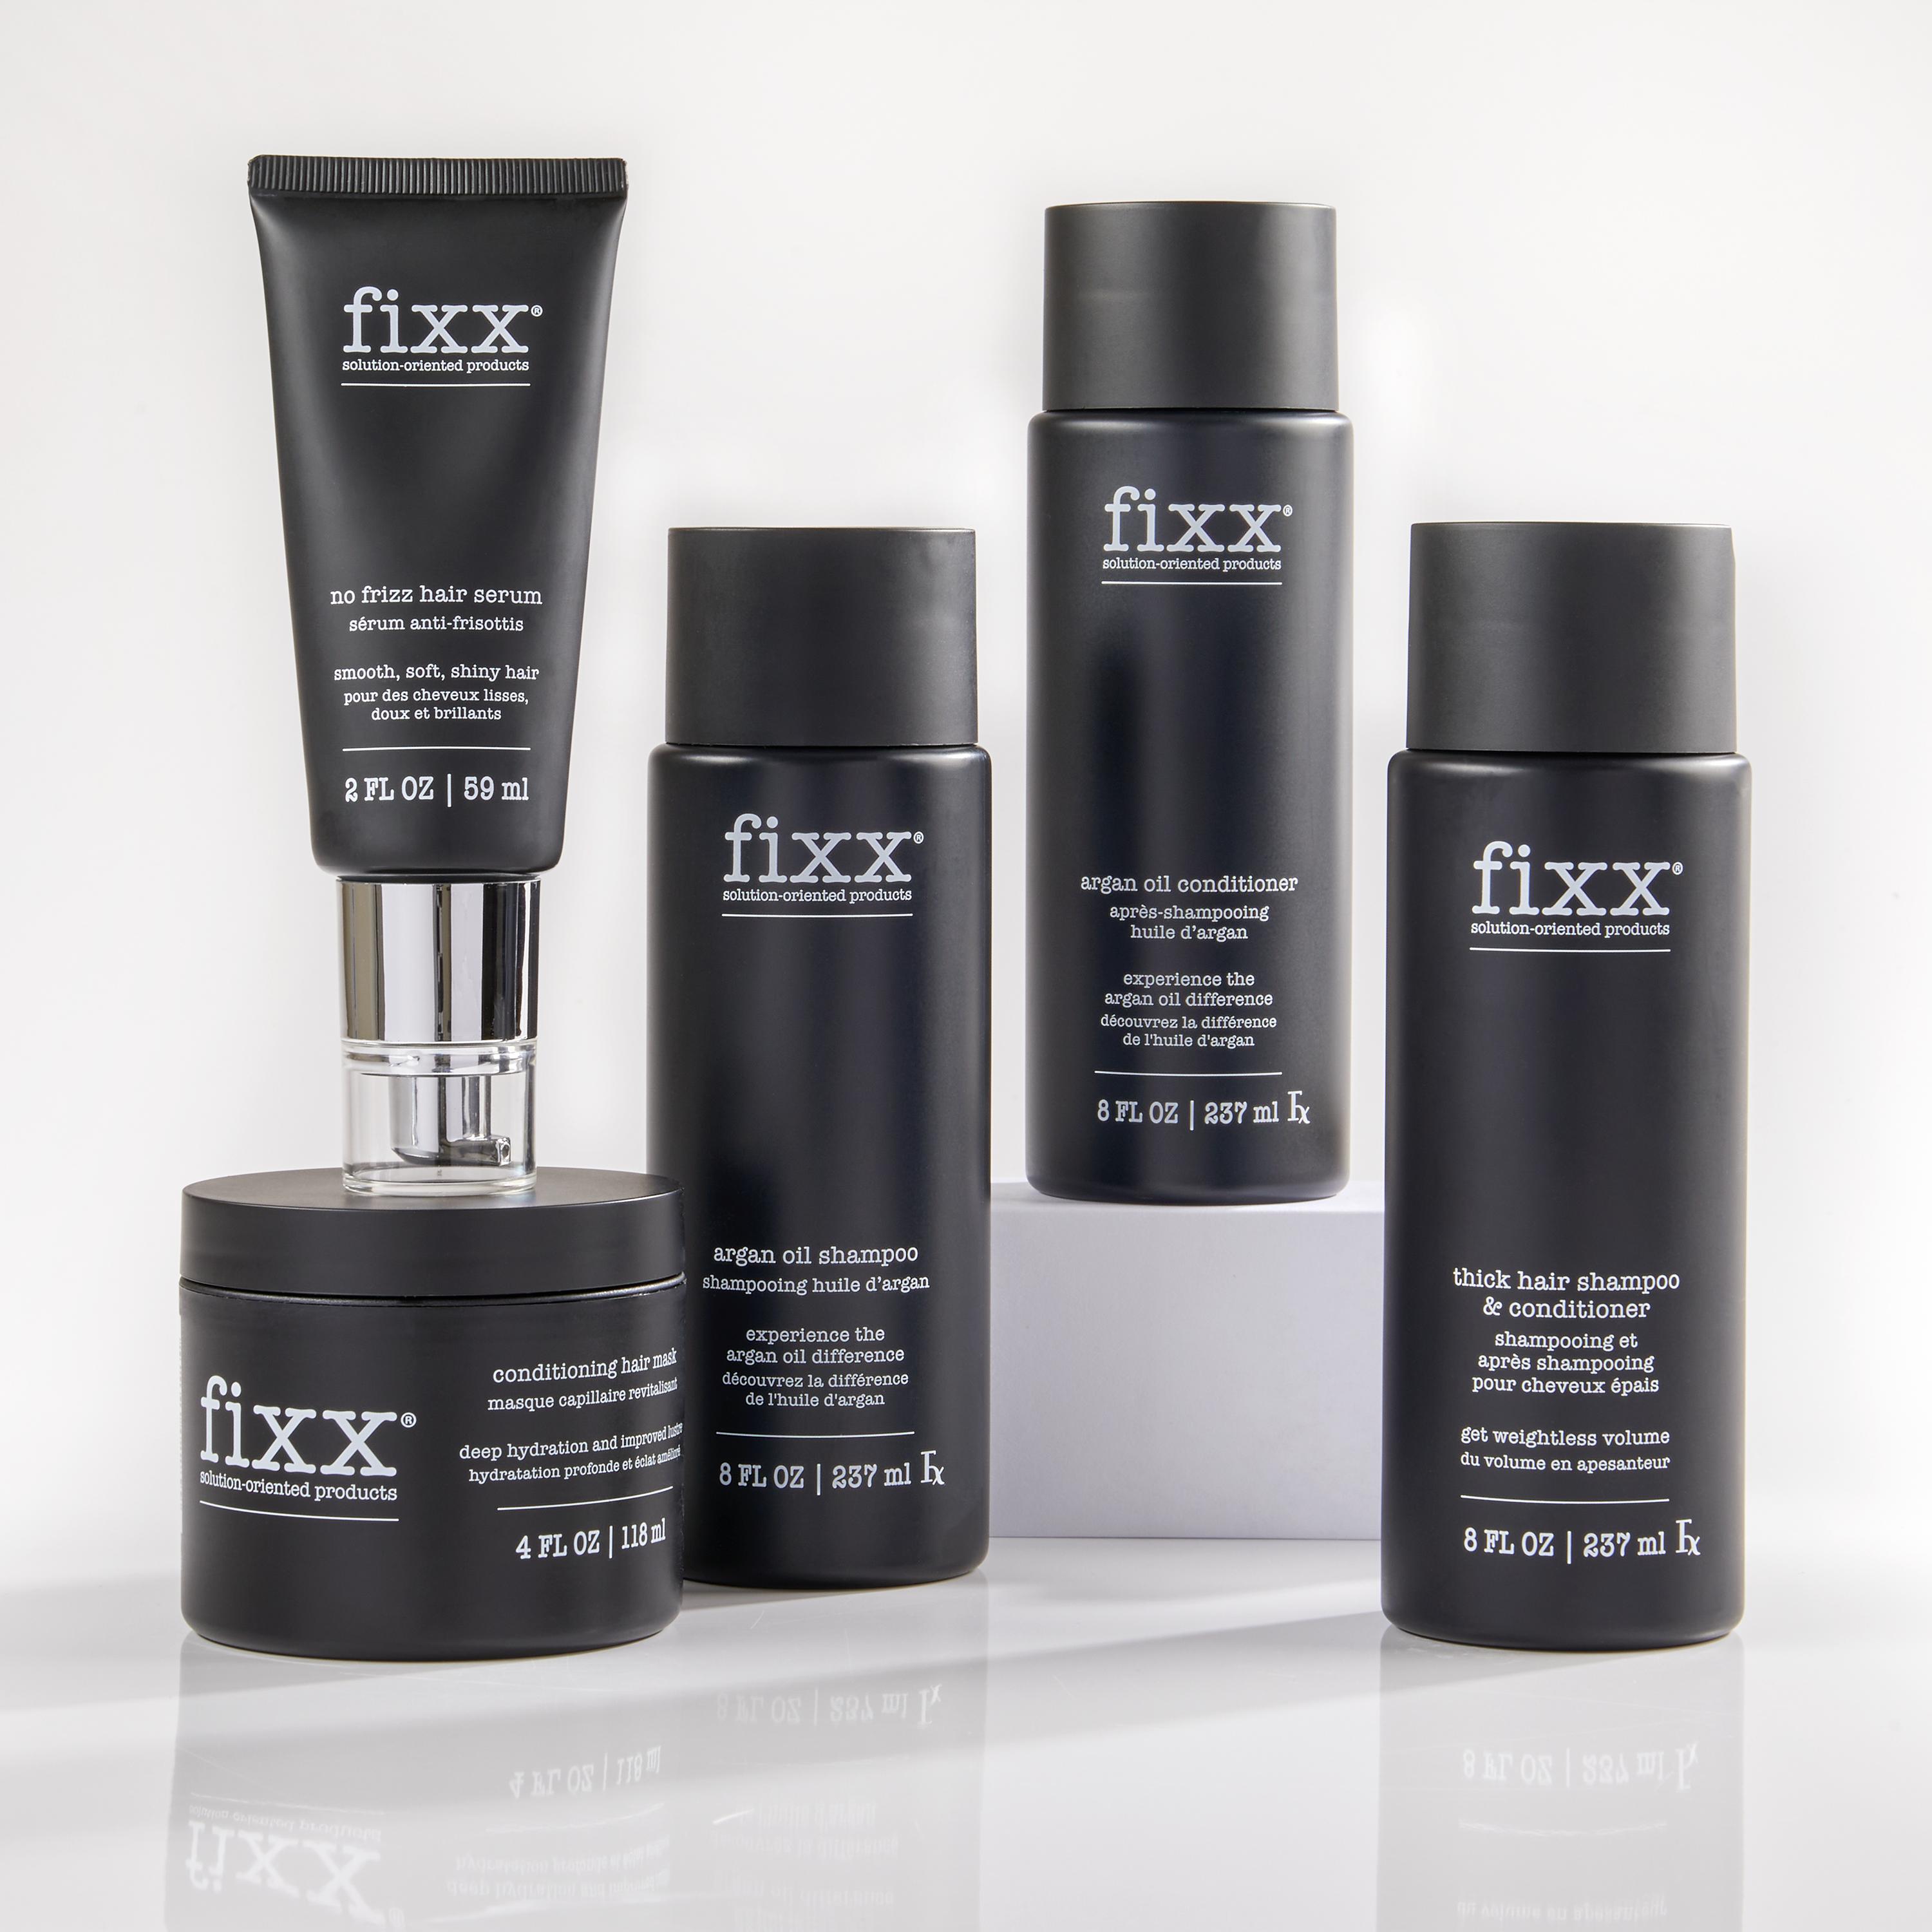 Fixx™ Conditioning Hair Mask